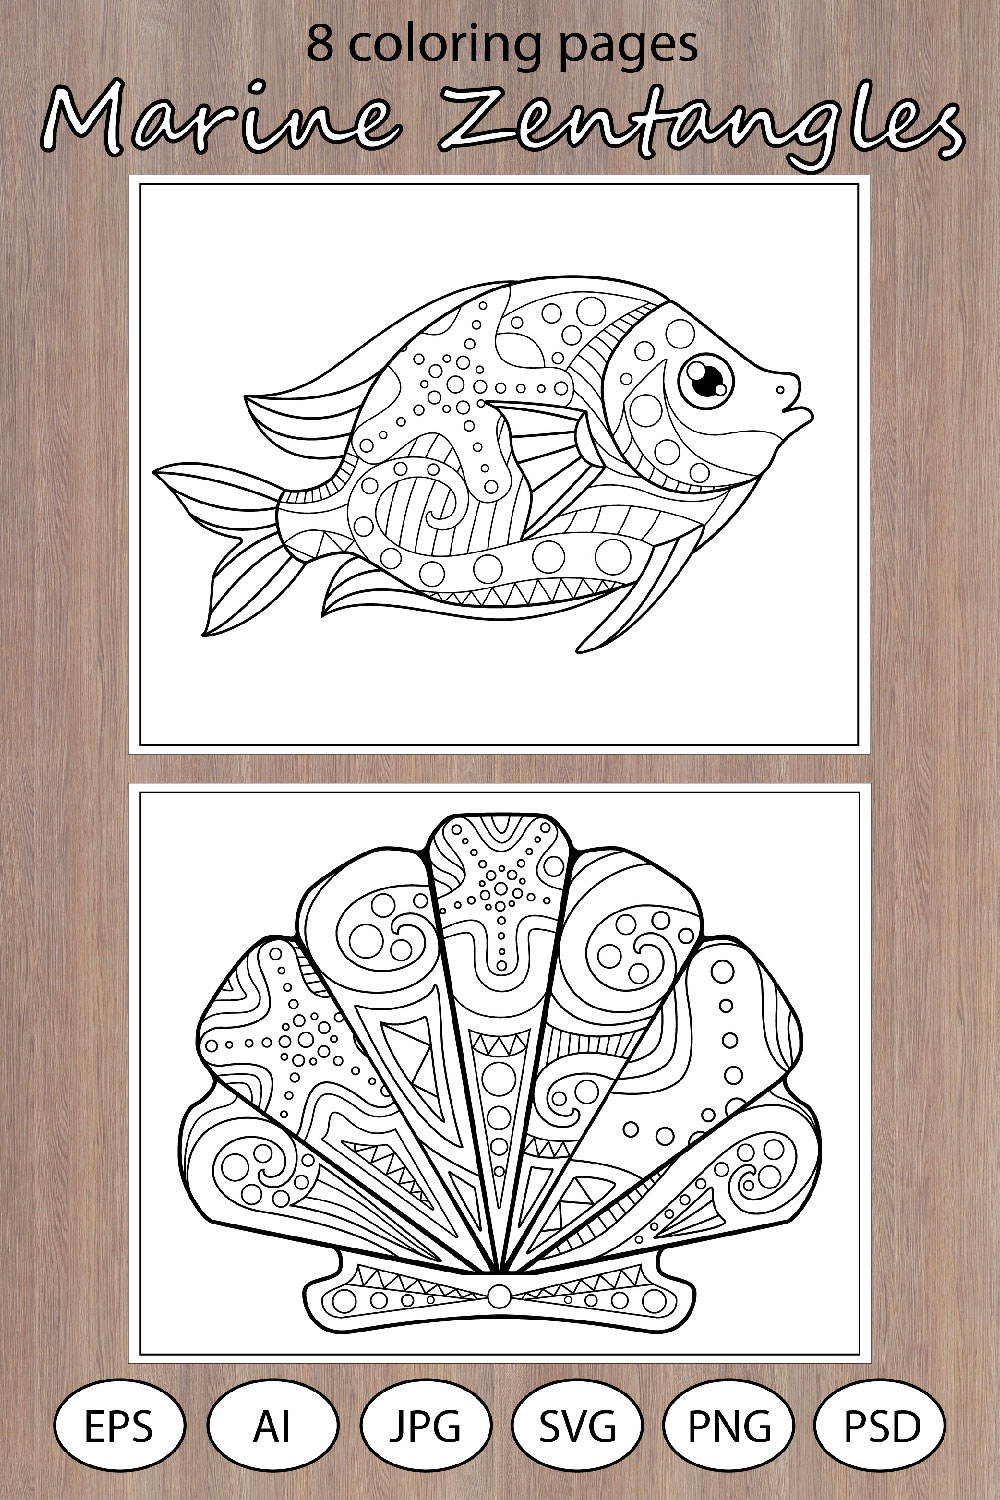 Marine Zentangles 8 coloring pages pinterest preview image.